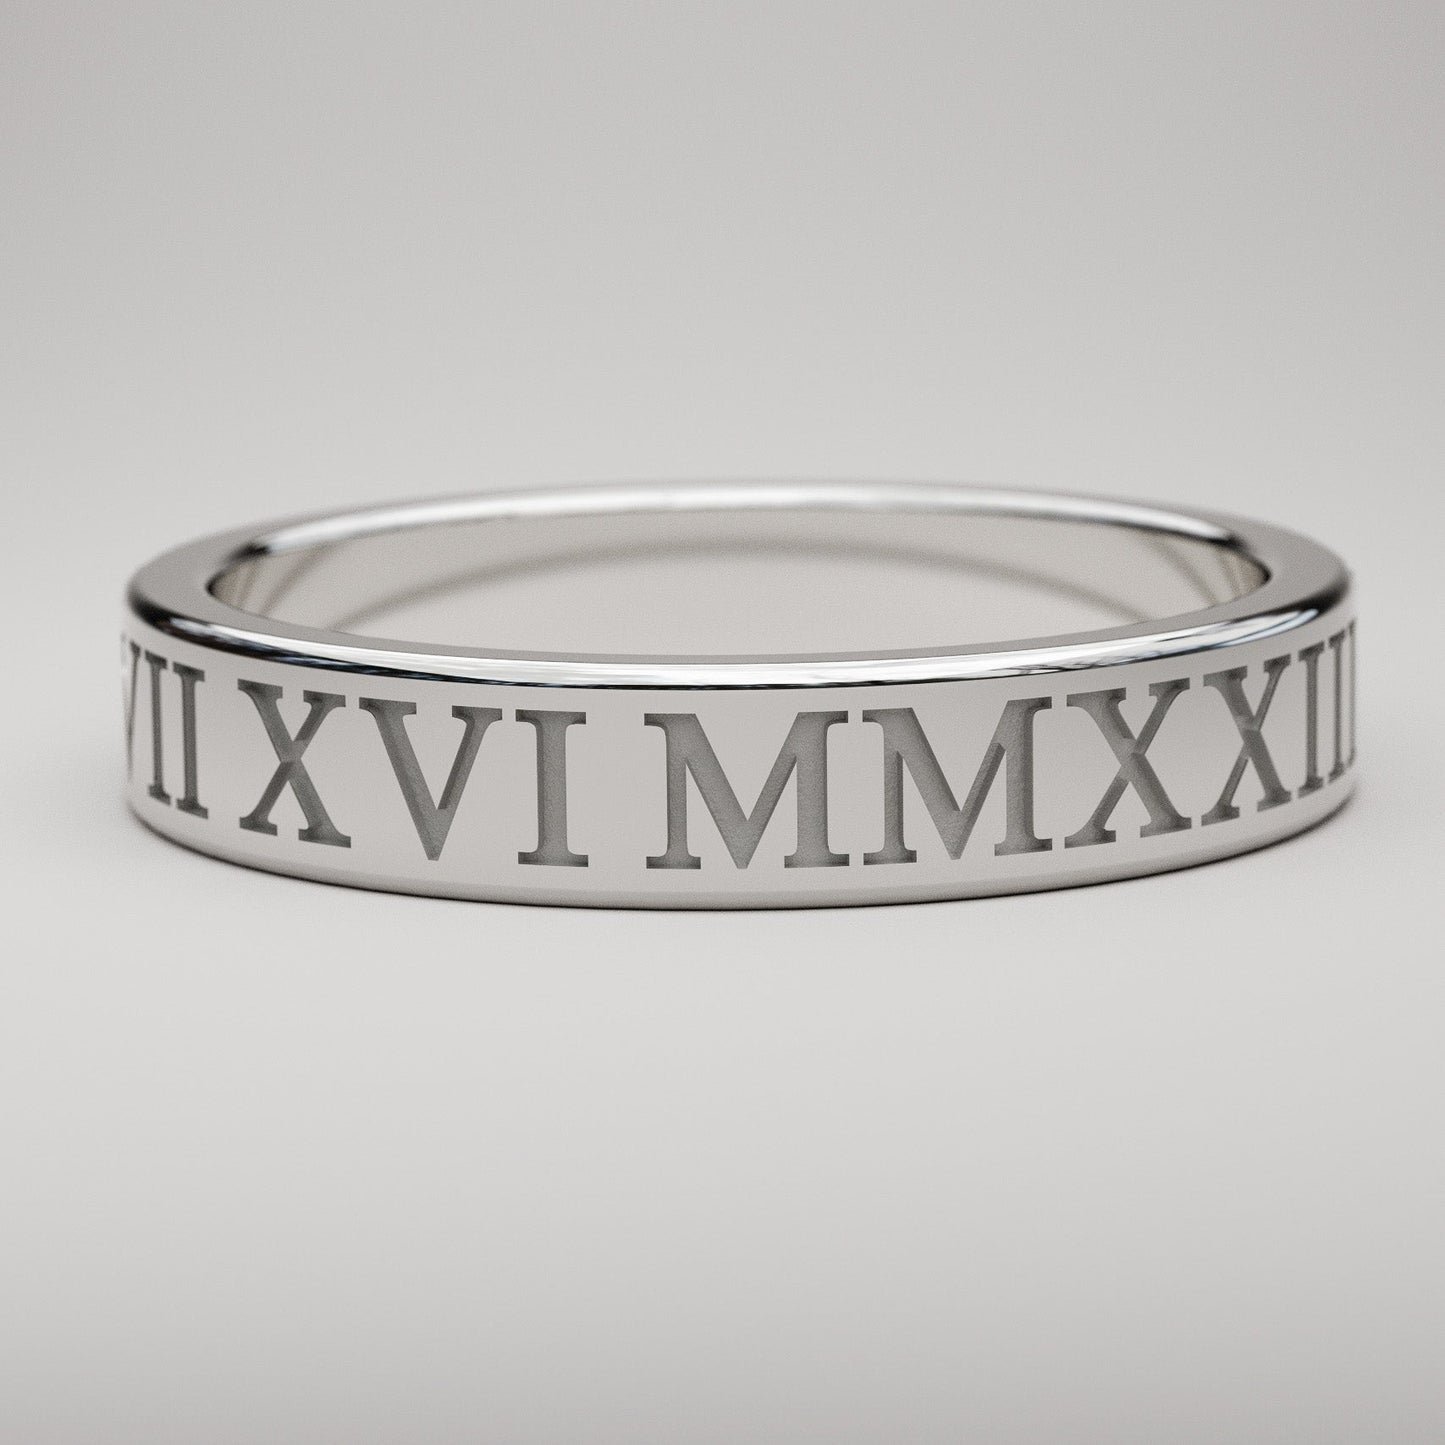 4mm wide personalized Roman Numeral band in white gold